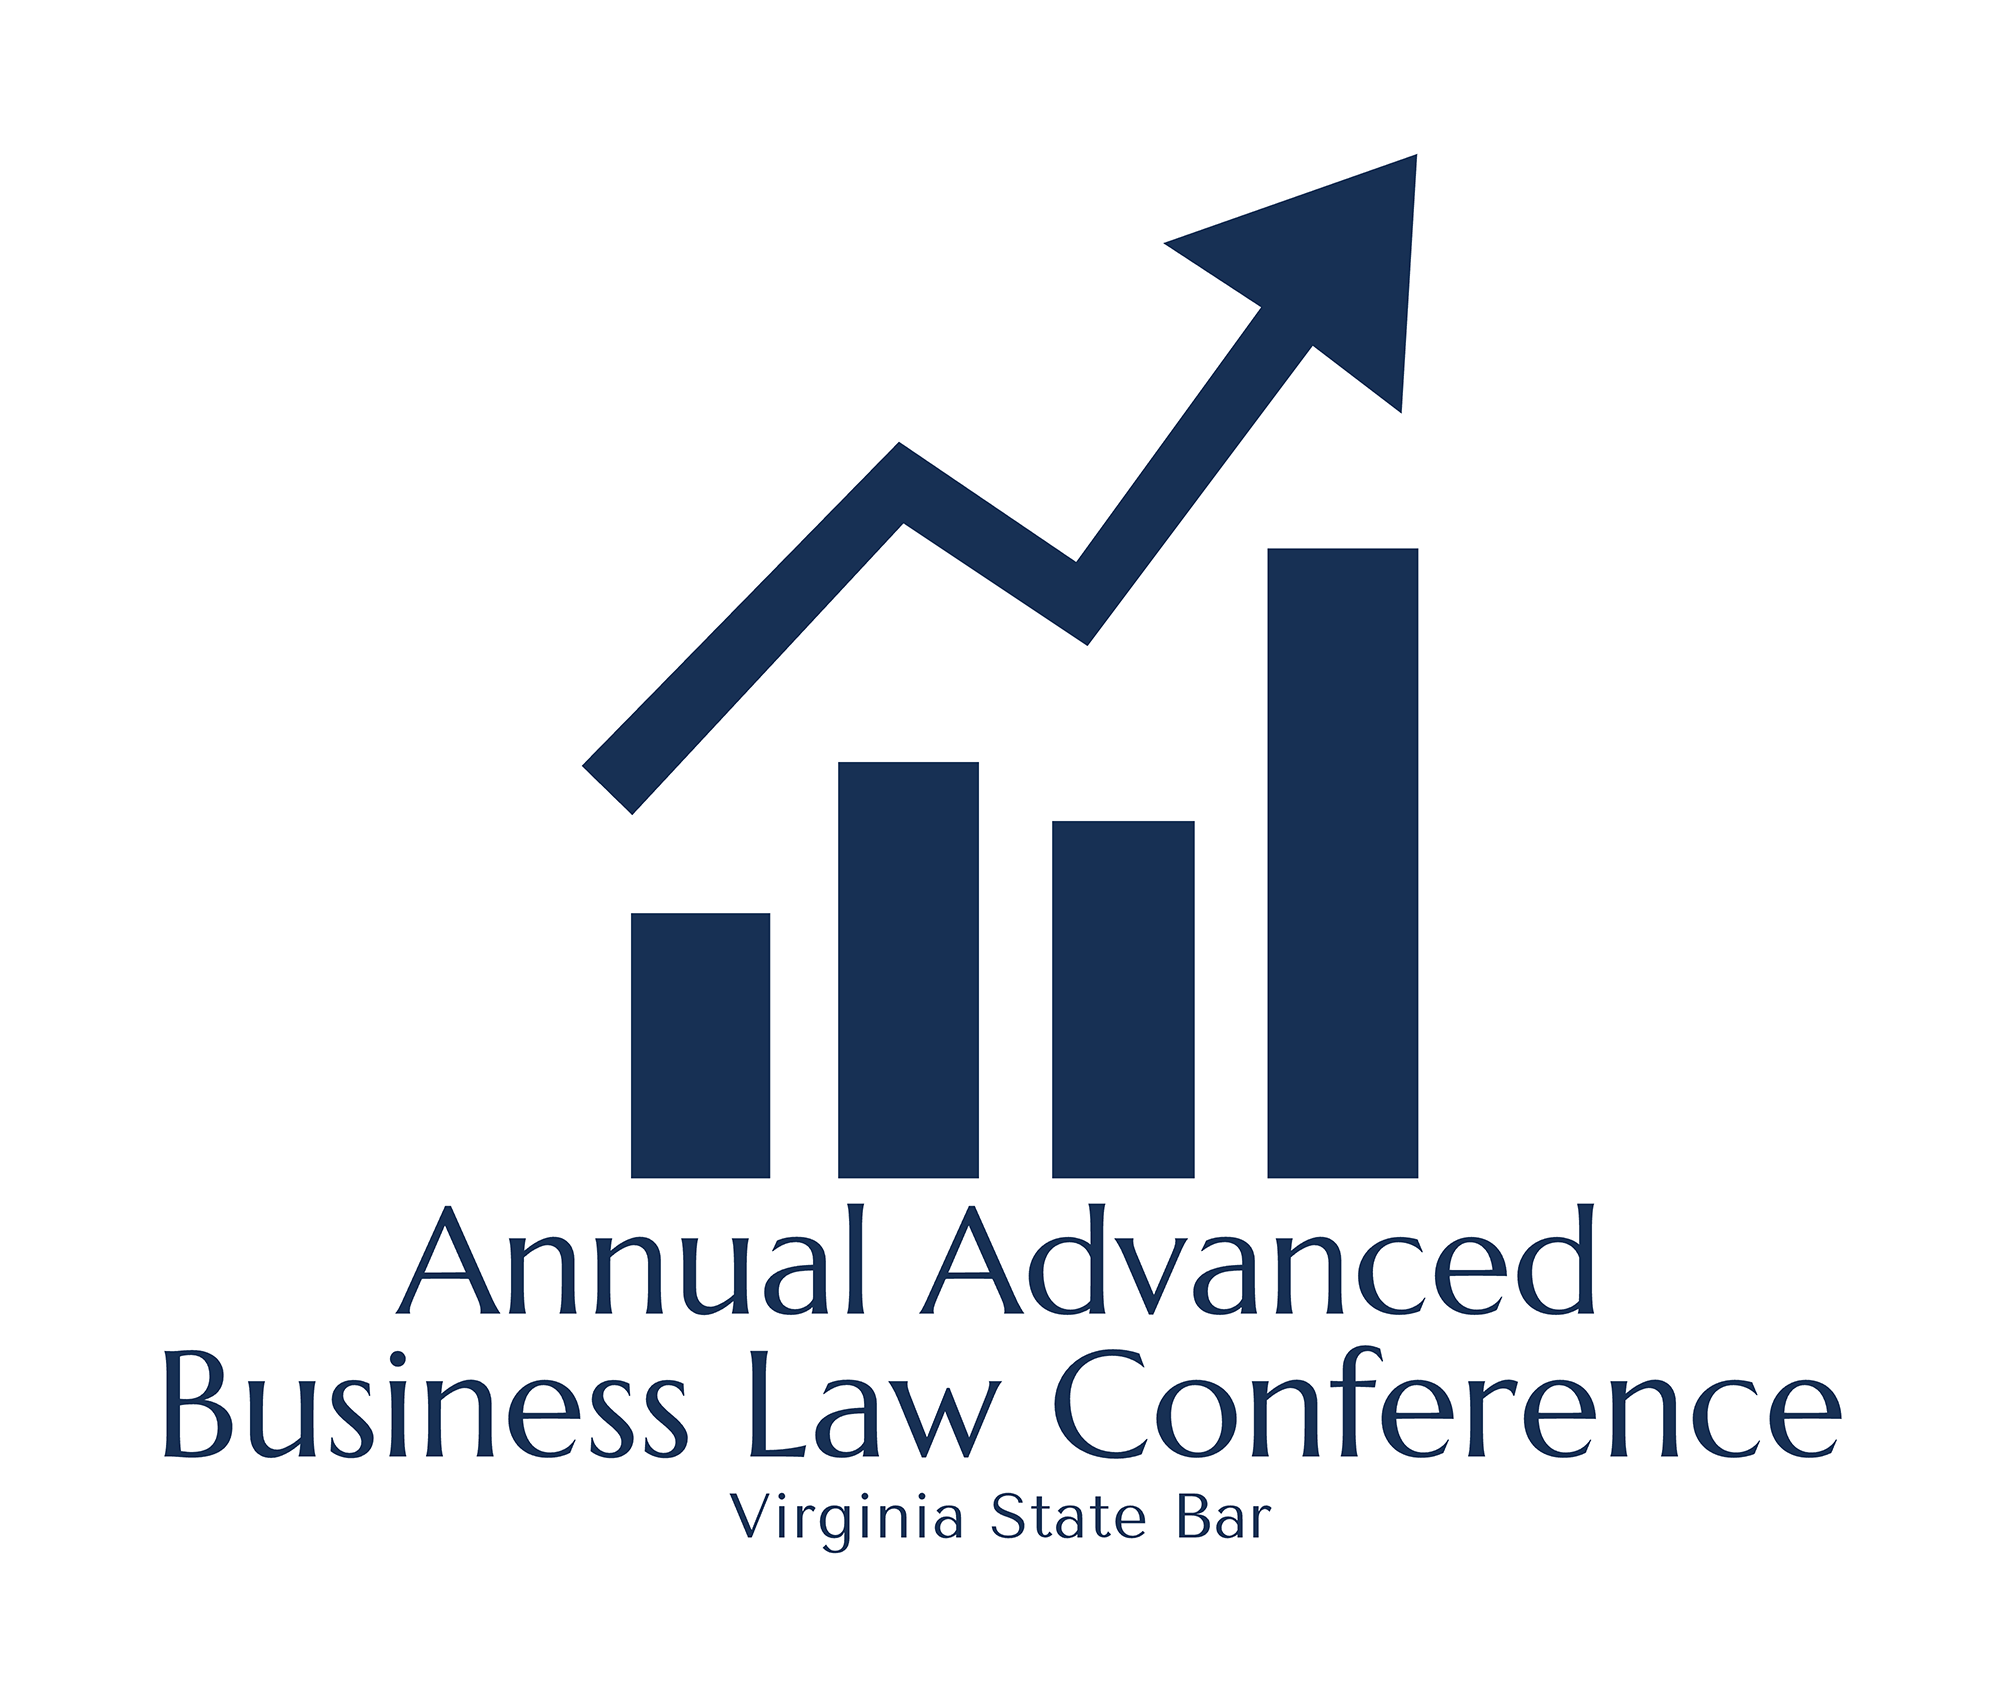 Annual Advanced Business Law Conference logo